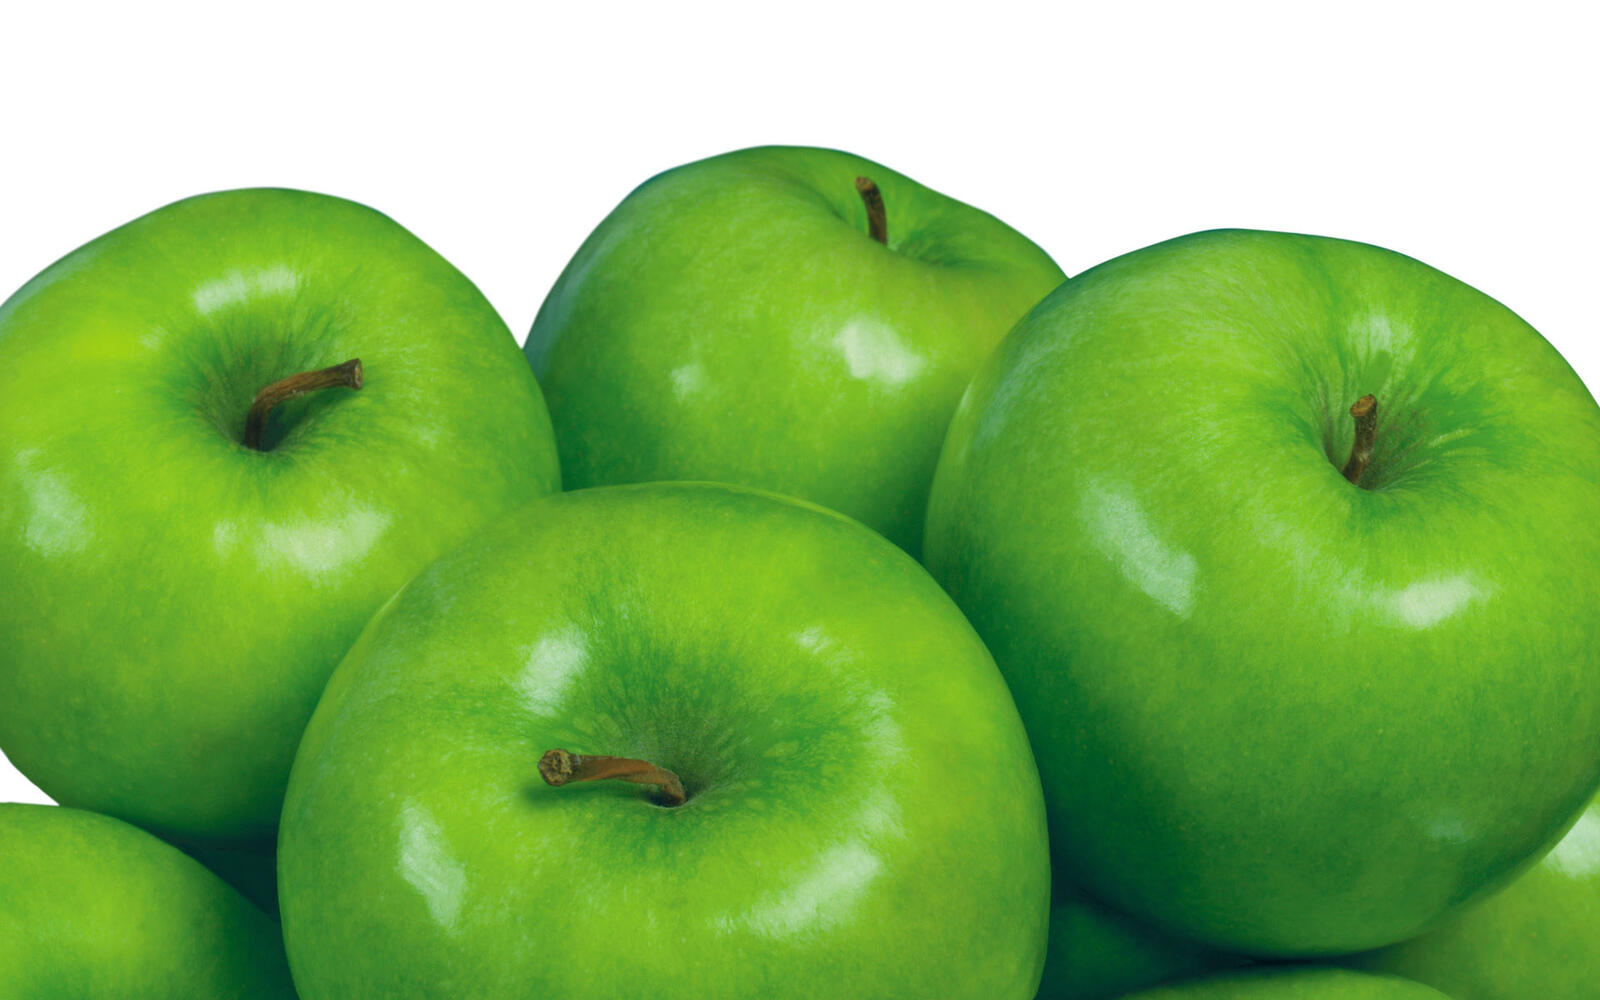 Wallpapers fruits apples green on the desktop